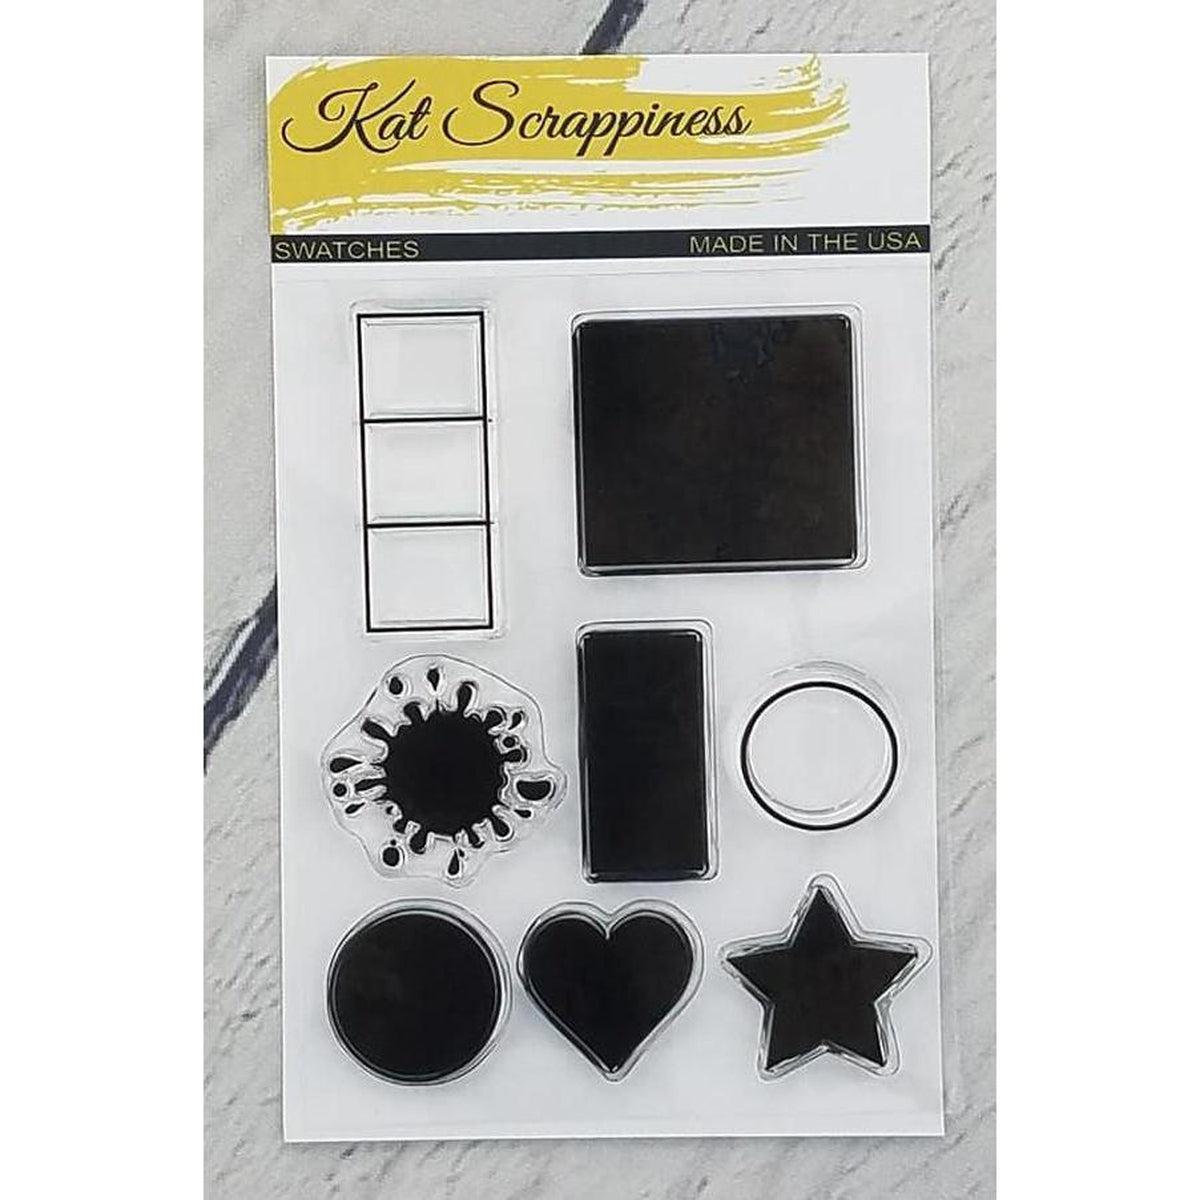 Swatches 3x4 Clear Stamps by Kat Scrappiness - Kat Scrappiness